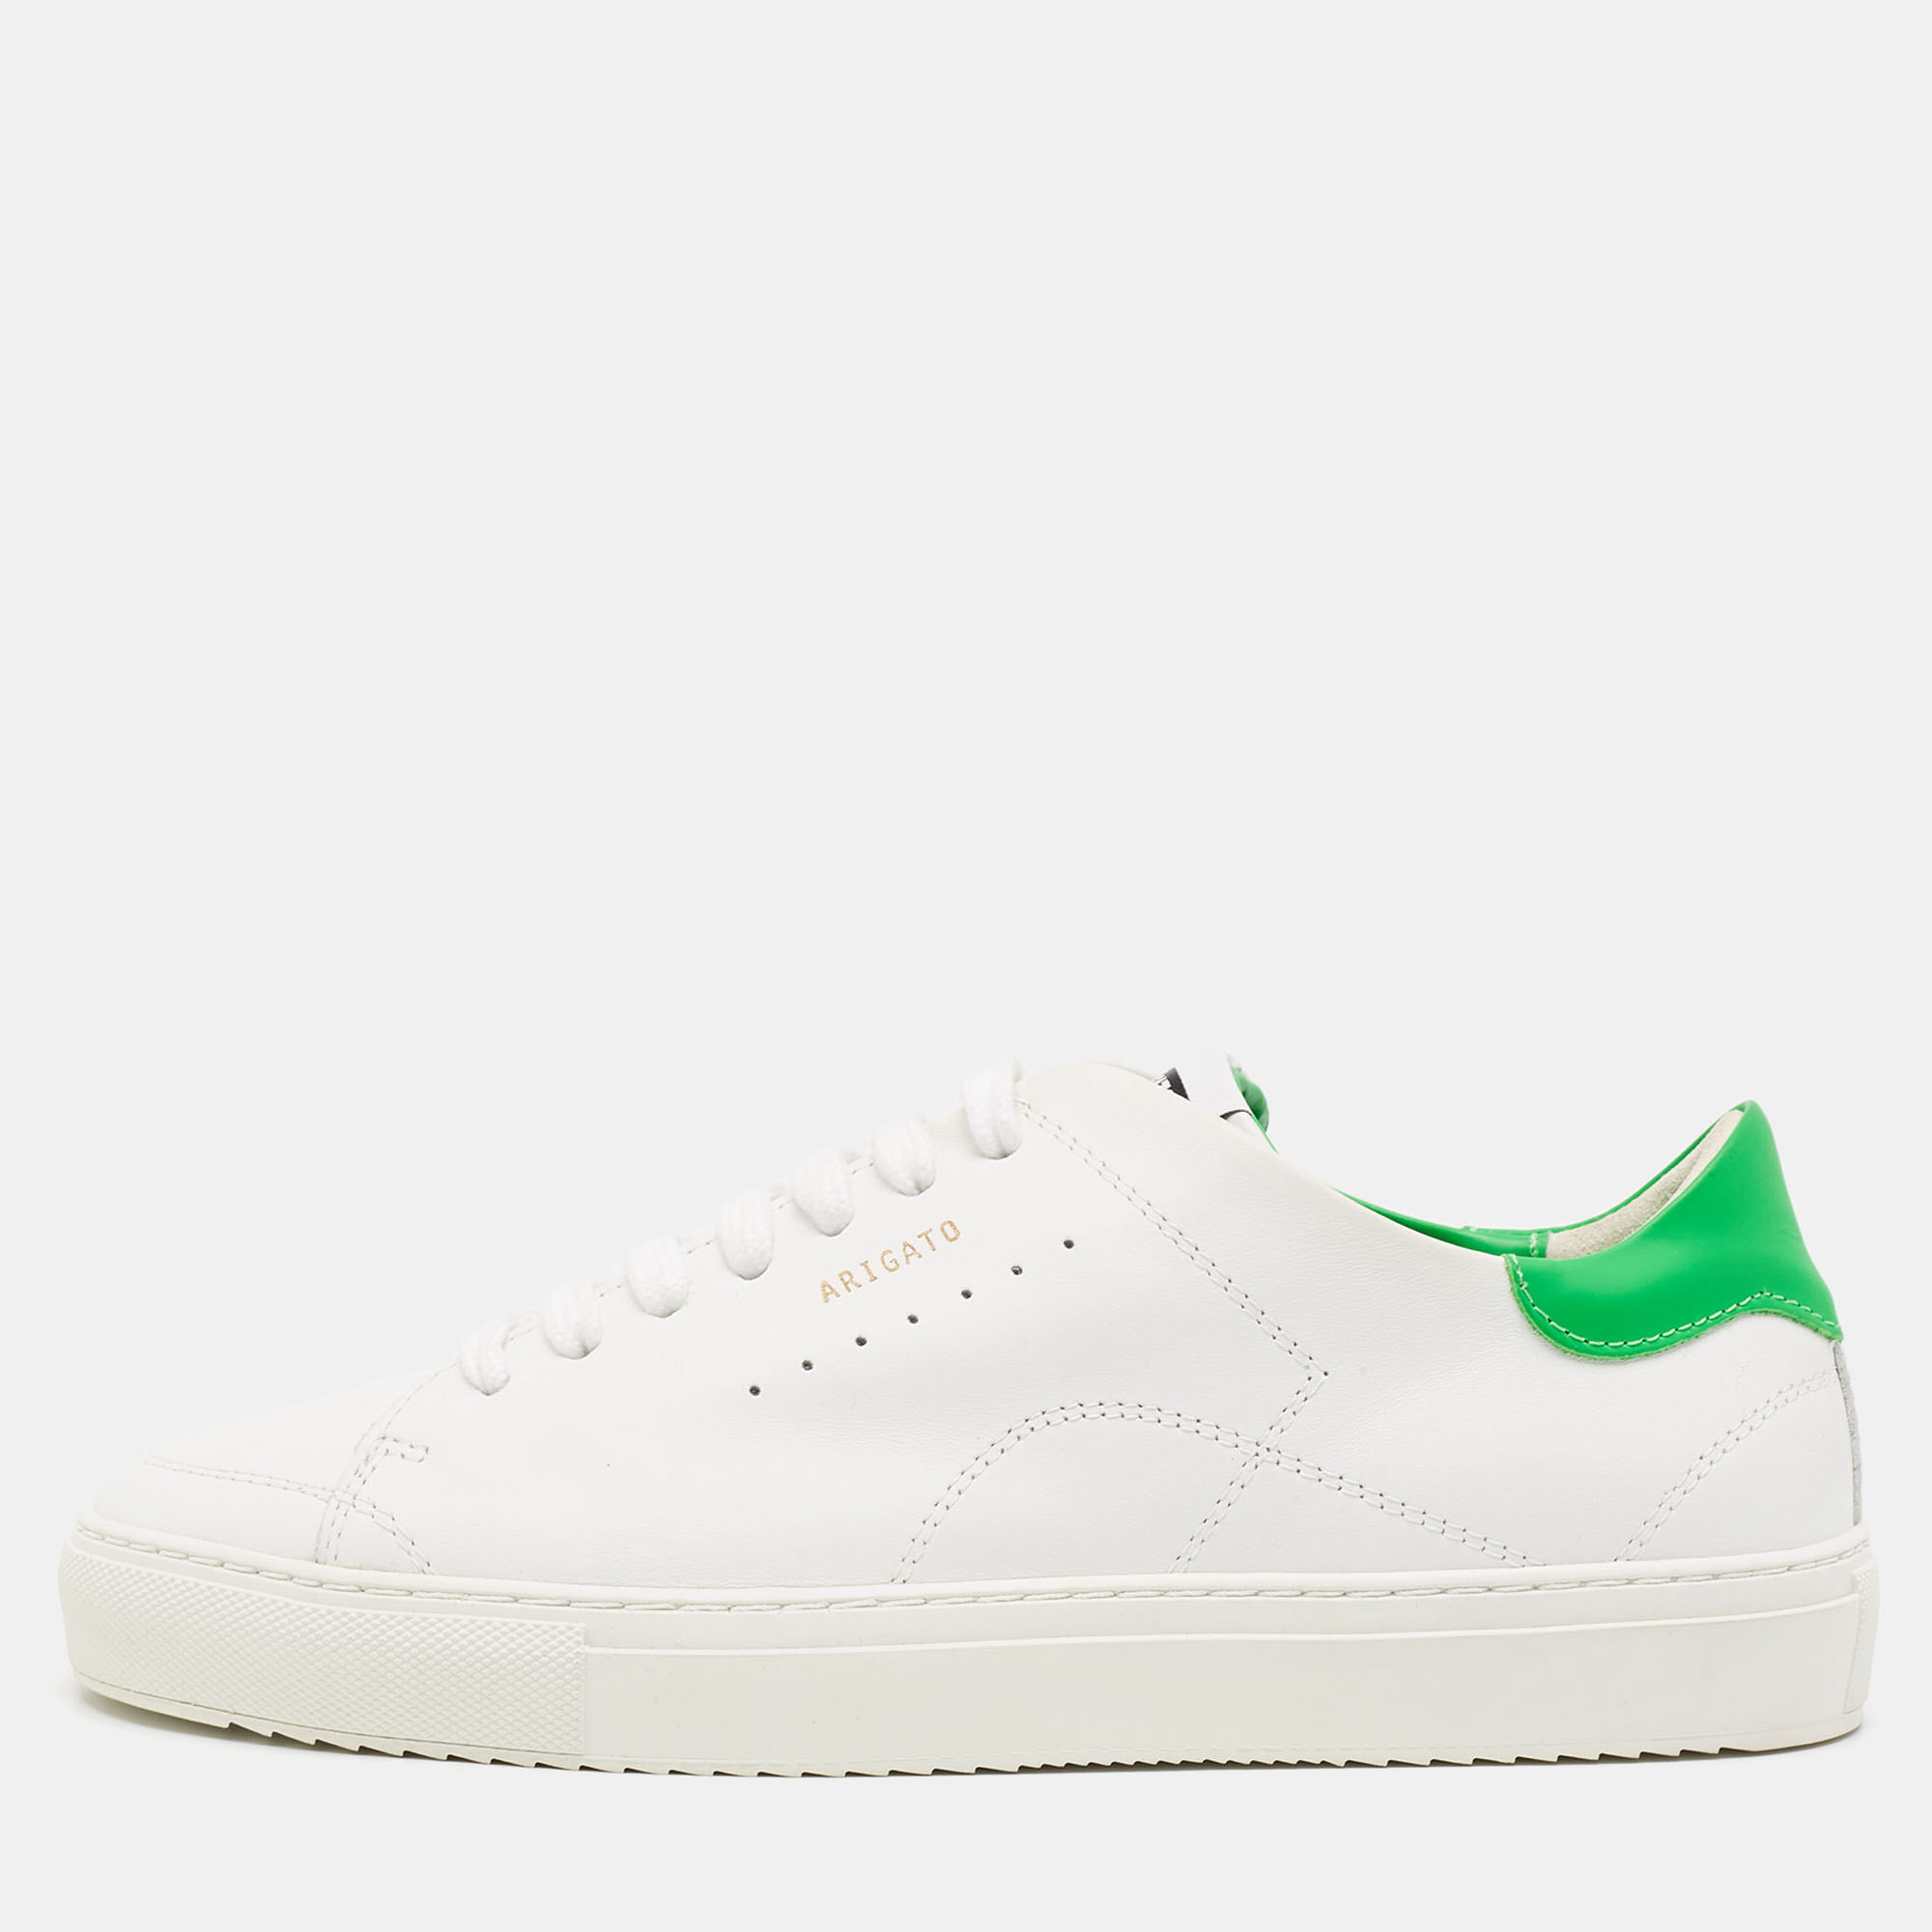 Pre-owned Axel Arigato White/green Leather Clean Trainers Size 40